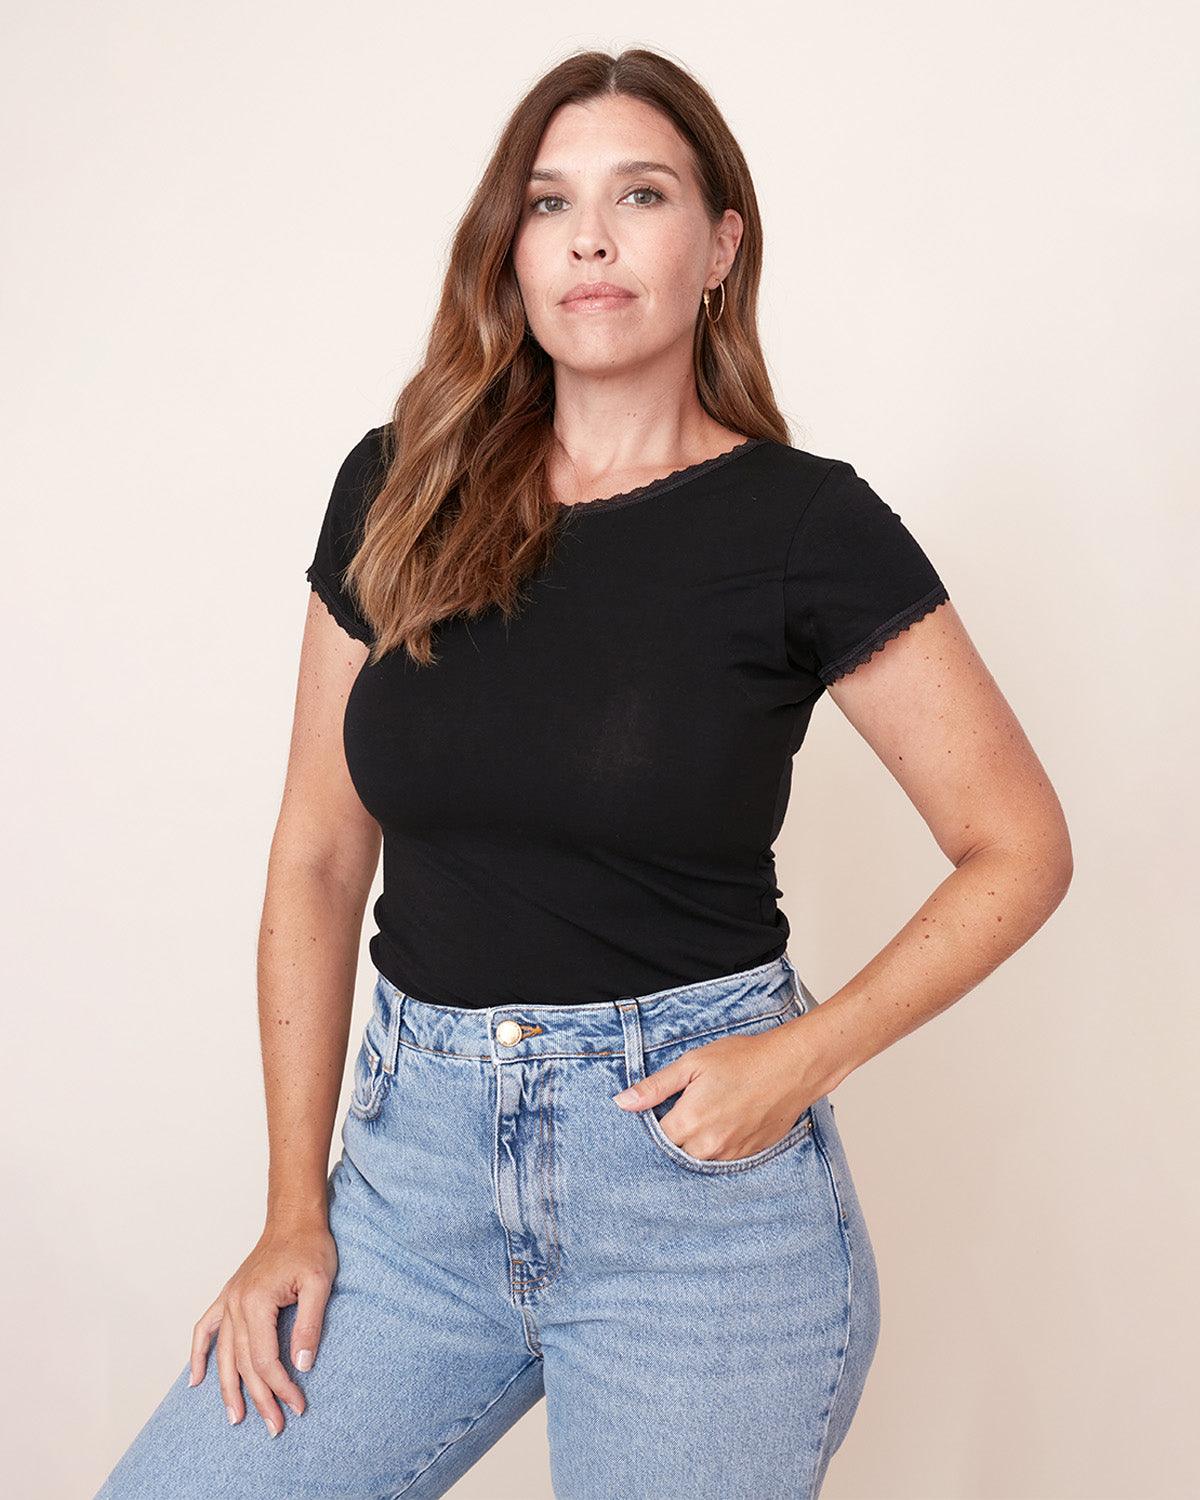 "#color_BLACK|Ashleigh is 5'10", wearing a size M